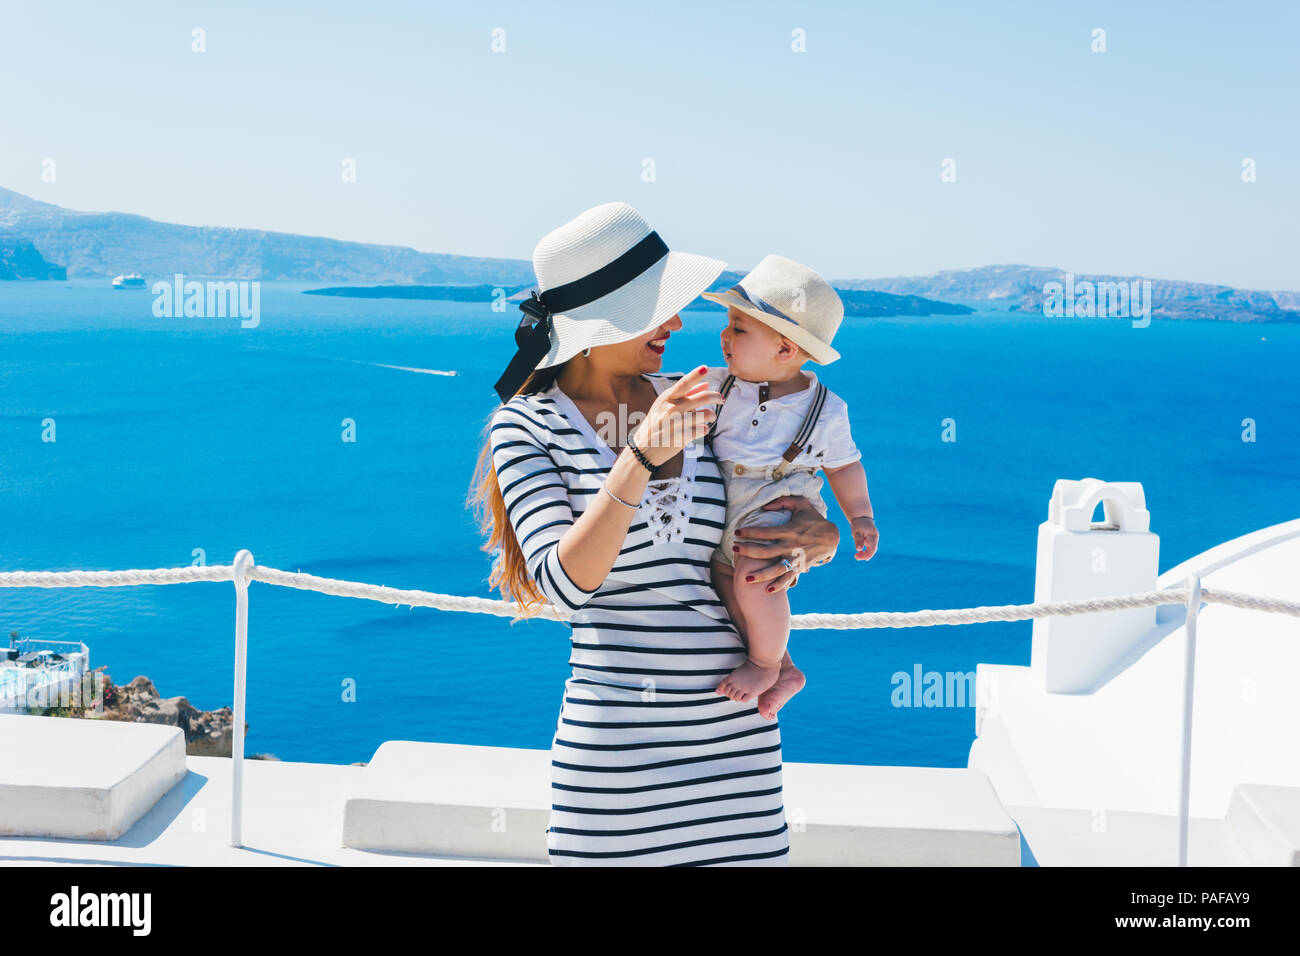 Mother and son enjoying a holiday in Santorini greece, Background the caldera and the famous Santorini volcano Stock Photo